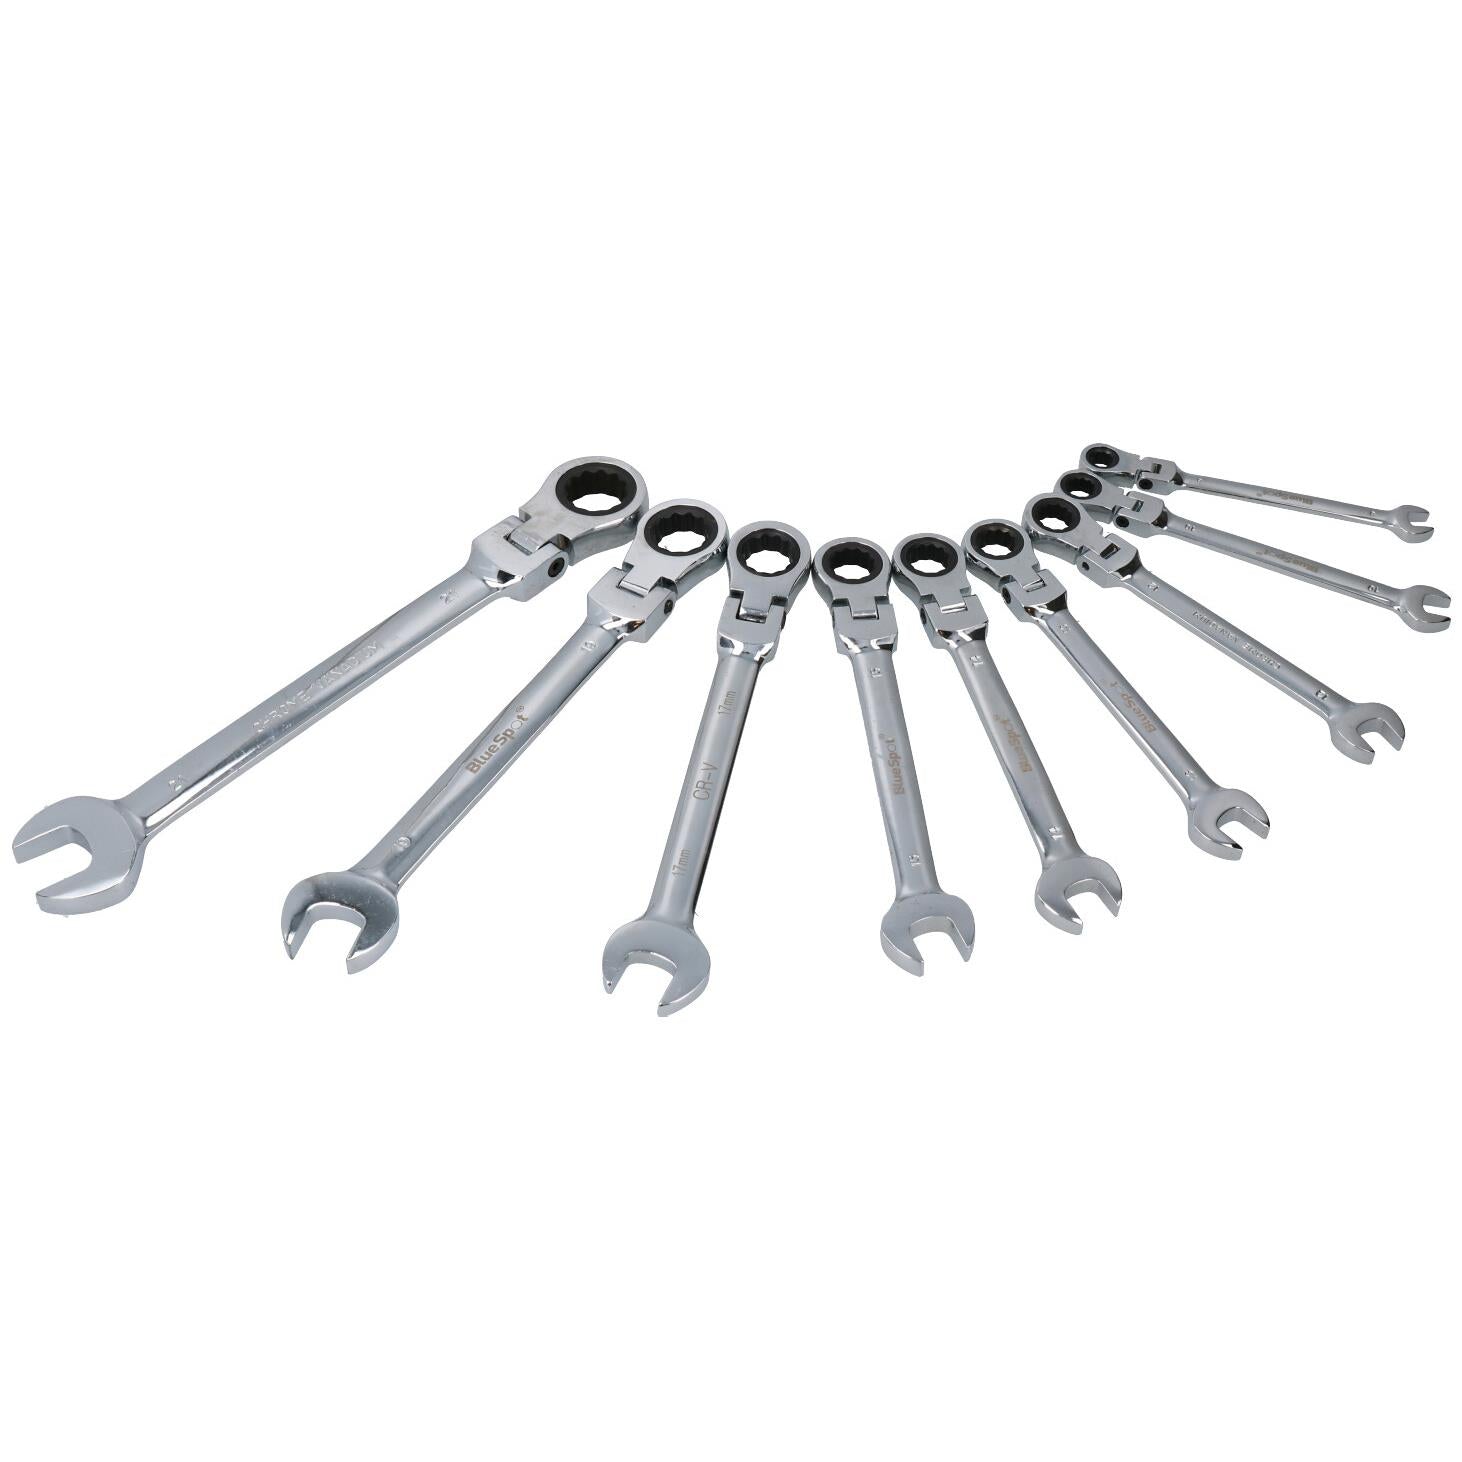 Metric MM Flexible Headed Combination Ratchet Spanner Wrench 8mm – 21mm